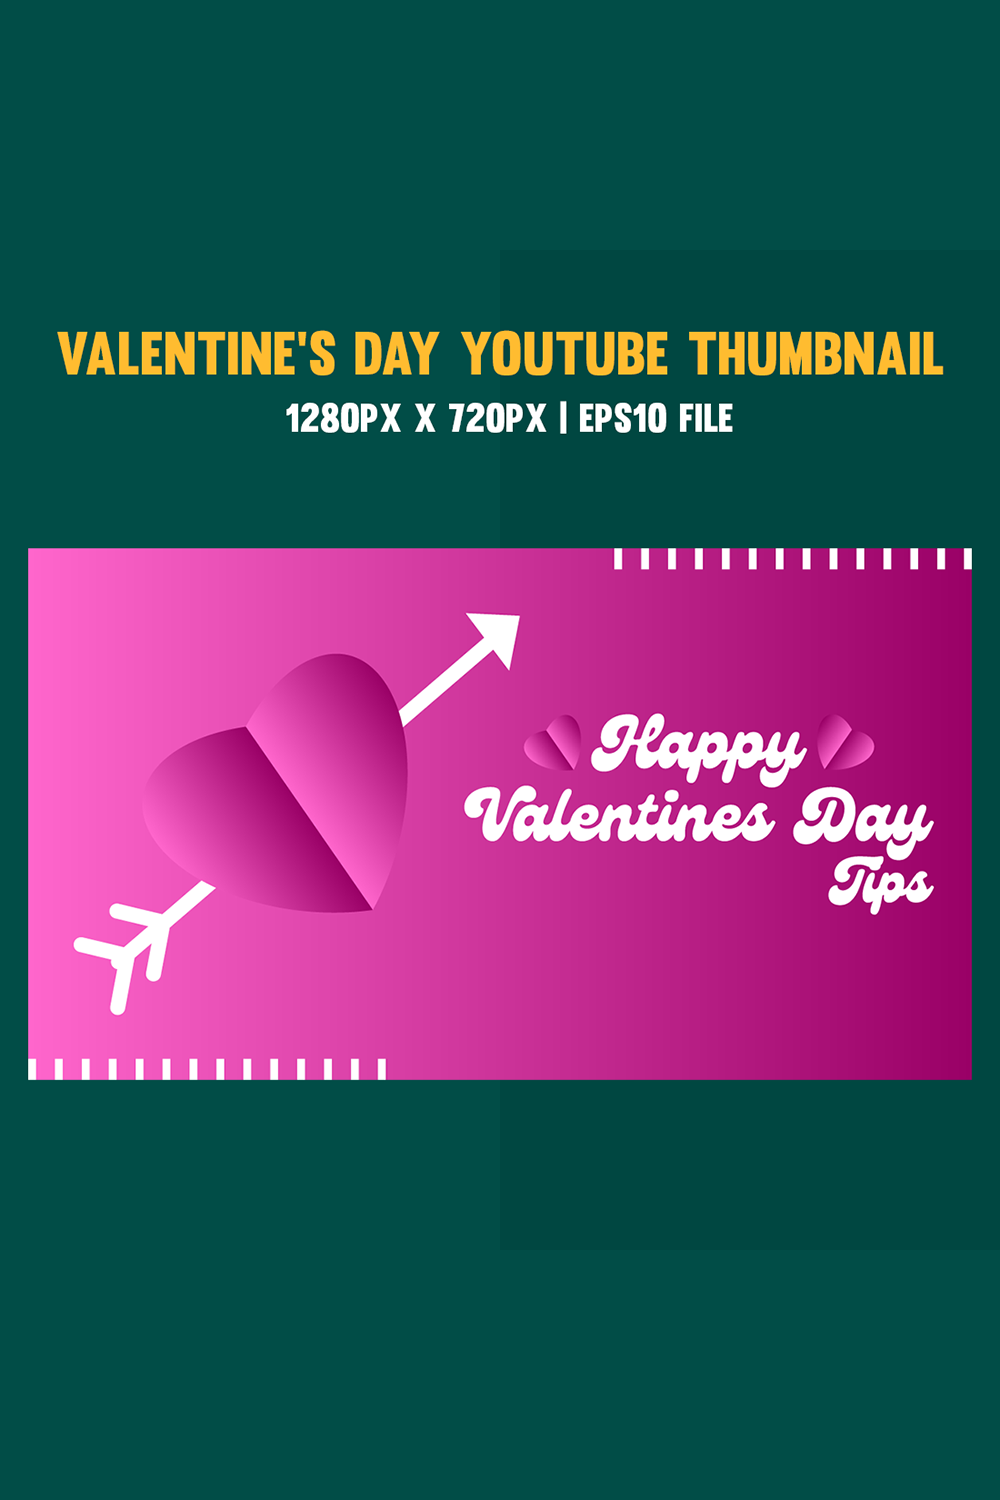 Happy Valentines Day Youtube Thumbnail pinterest preview image.